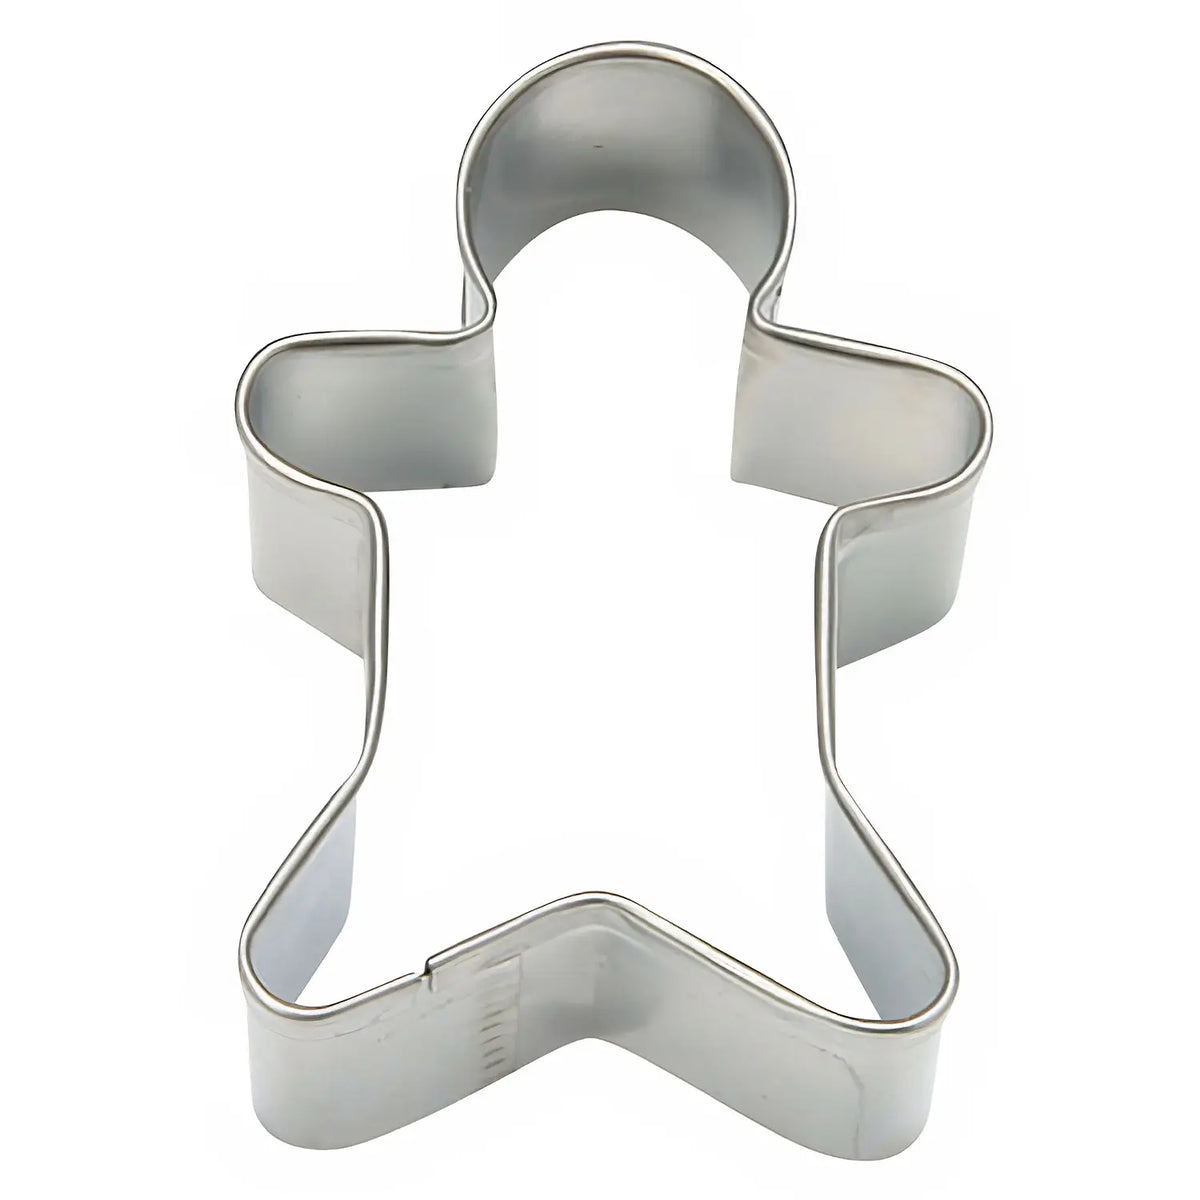 TIGERCROWN Cake Land Stainless Steel Cookie Cutter Gingerbread Man